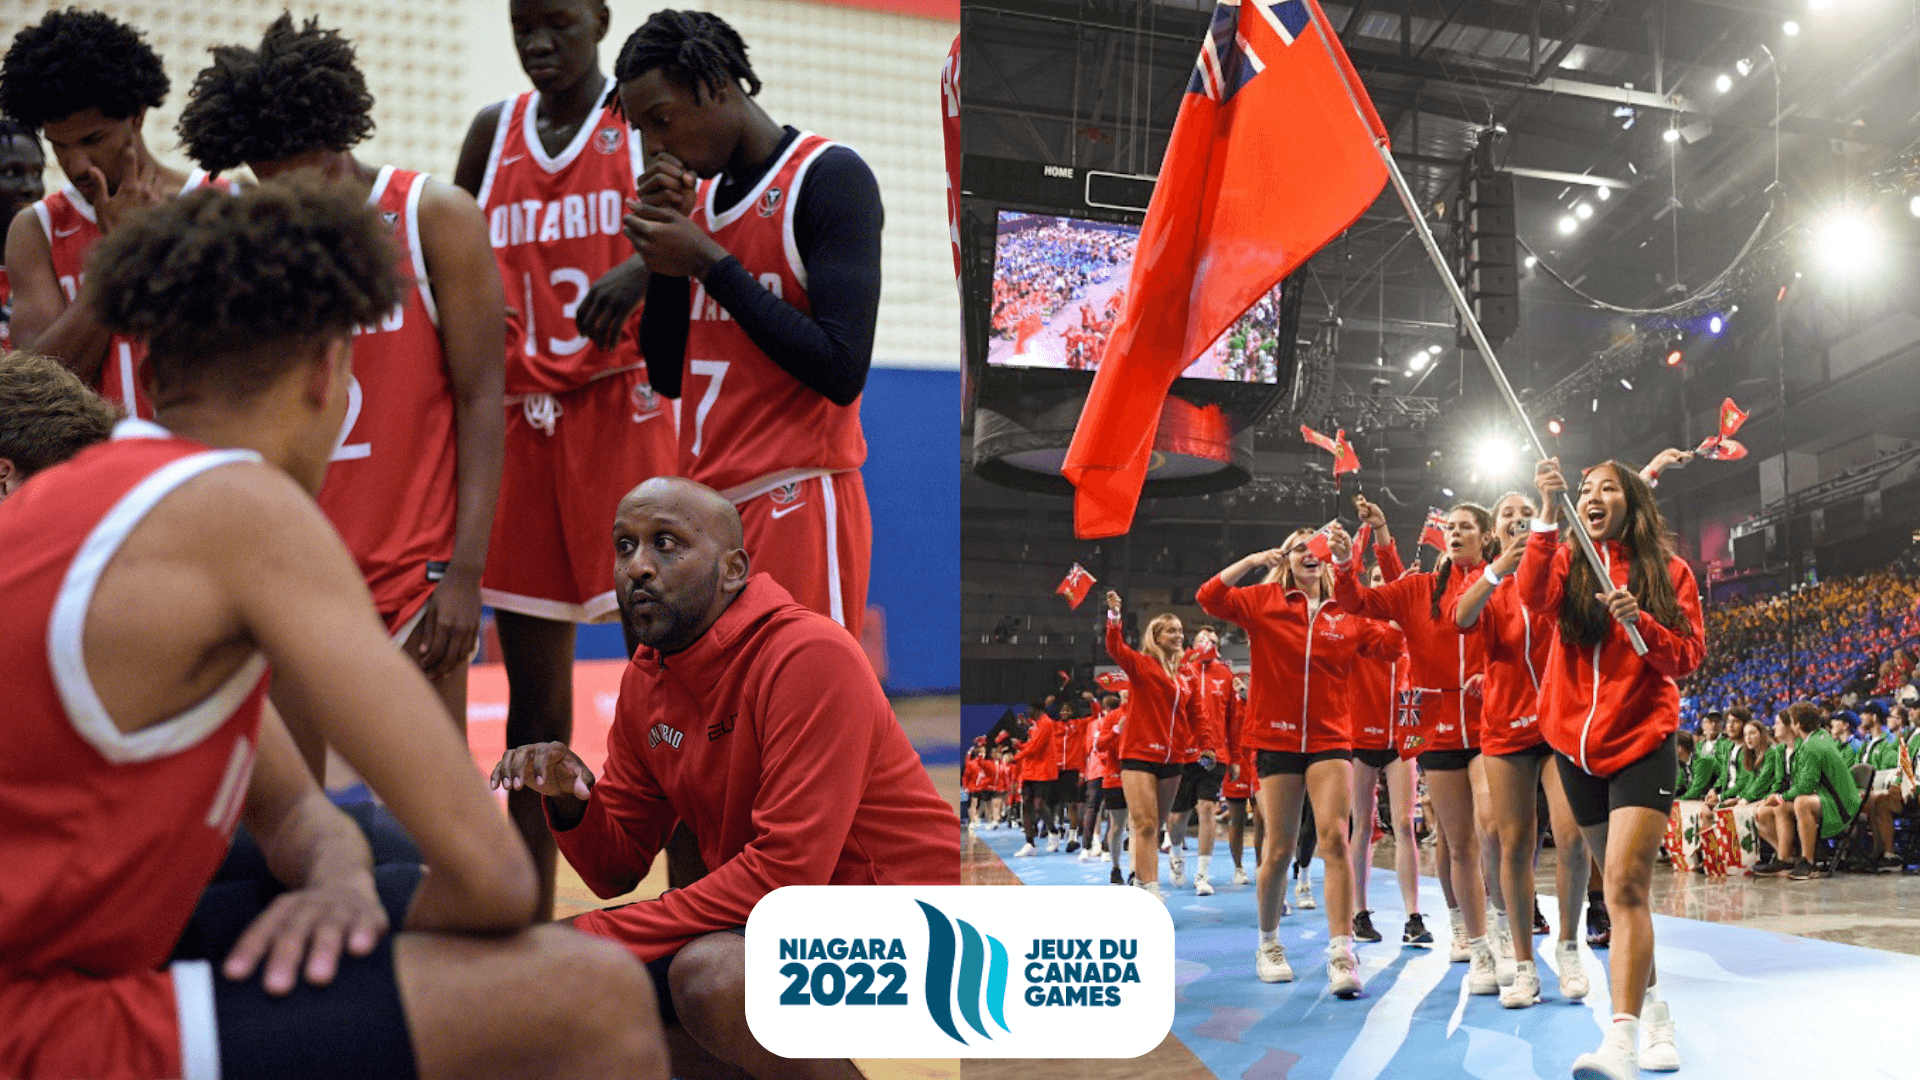 Team Ontario brings home one gold, one bronze from Niagara 2022 Canada